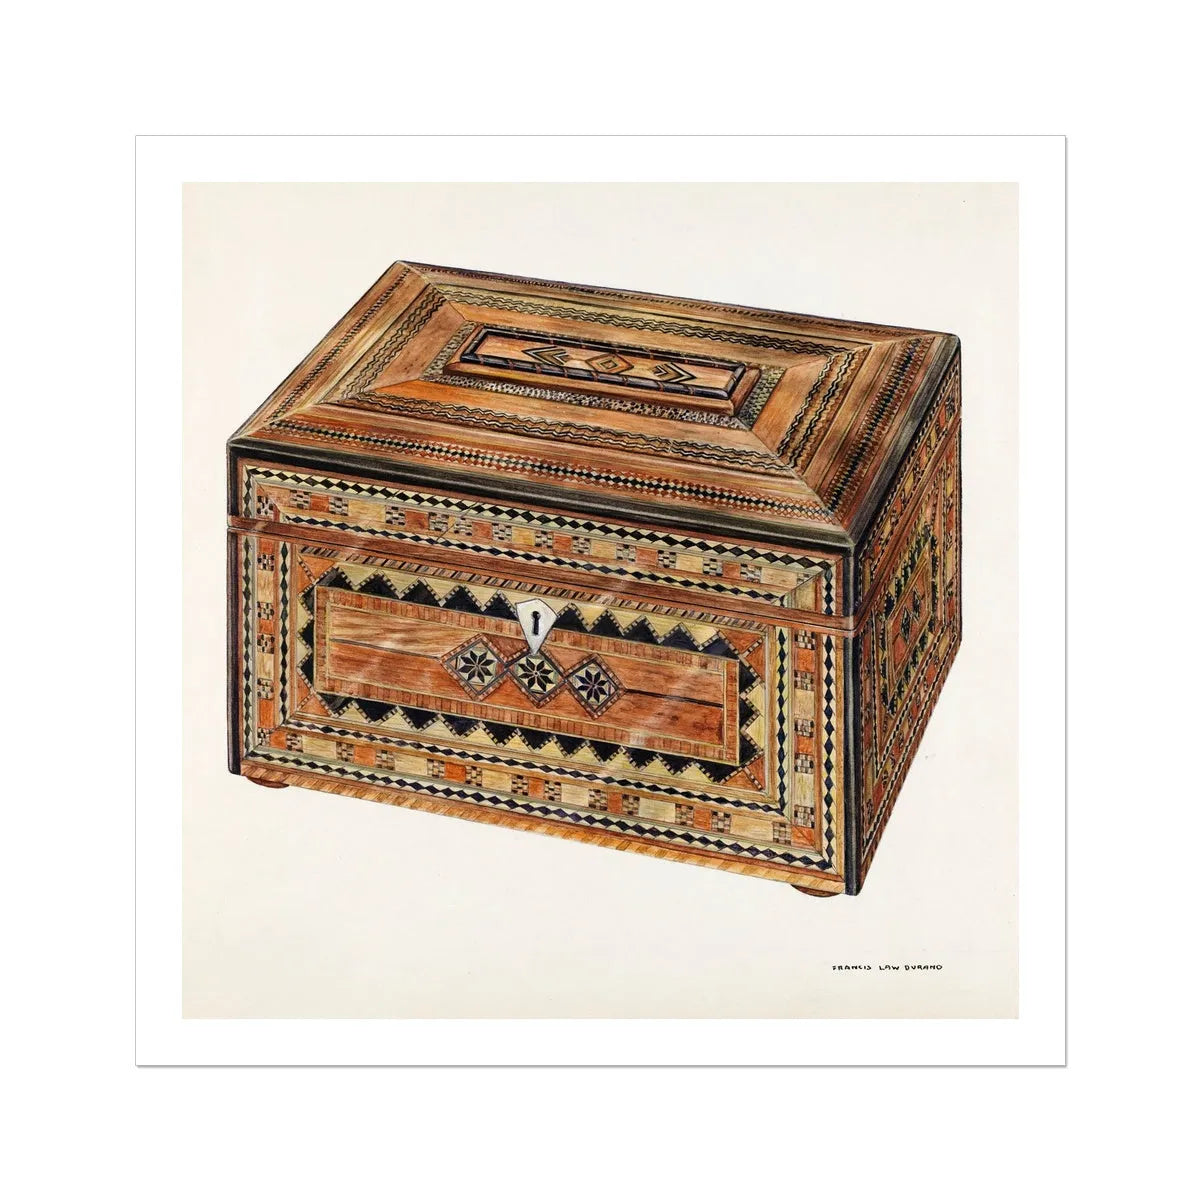 Inlaid Sewing Box By Francis Law Durand Fine Art Print - 30’x30’ - Posters Prints & Visual Artwork - Aesthetic Art